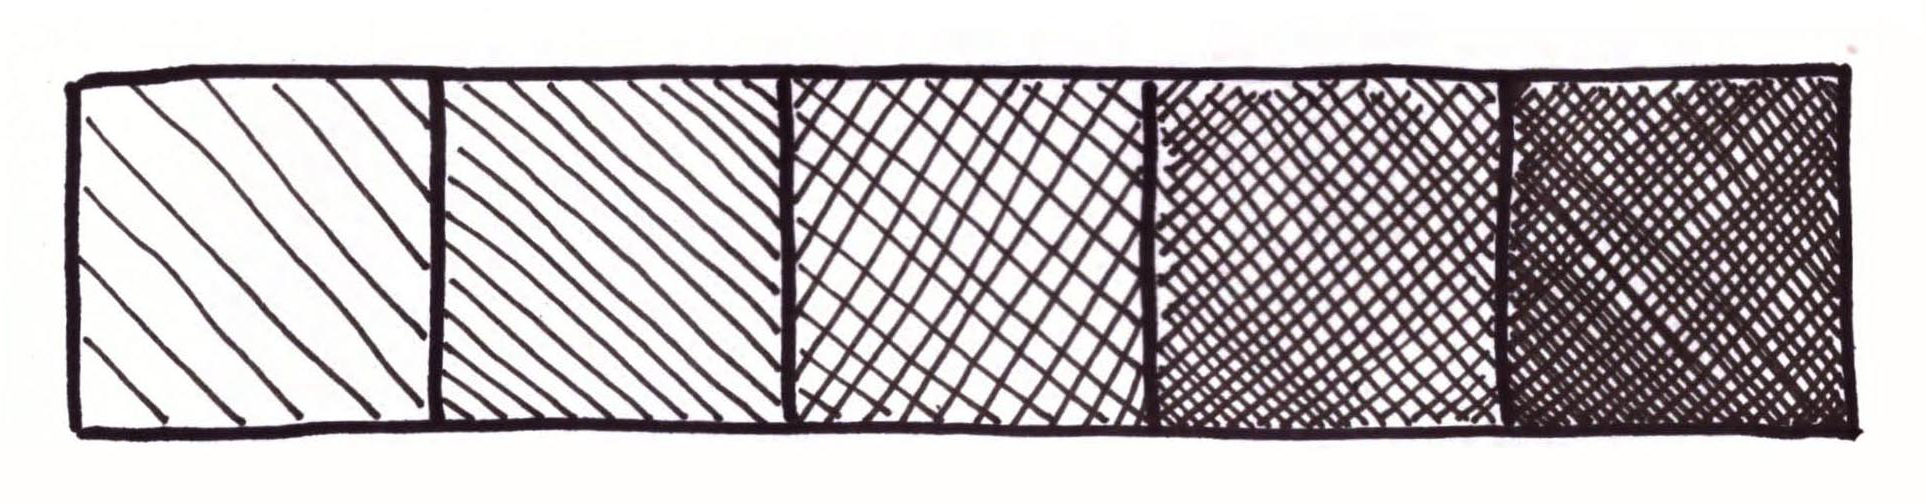 Value strip showing hatching and crosshatching.